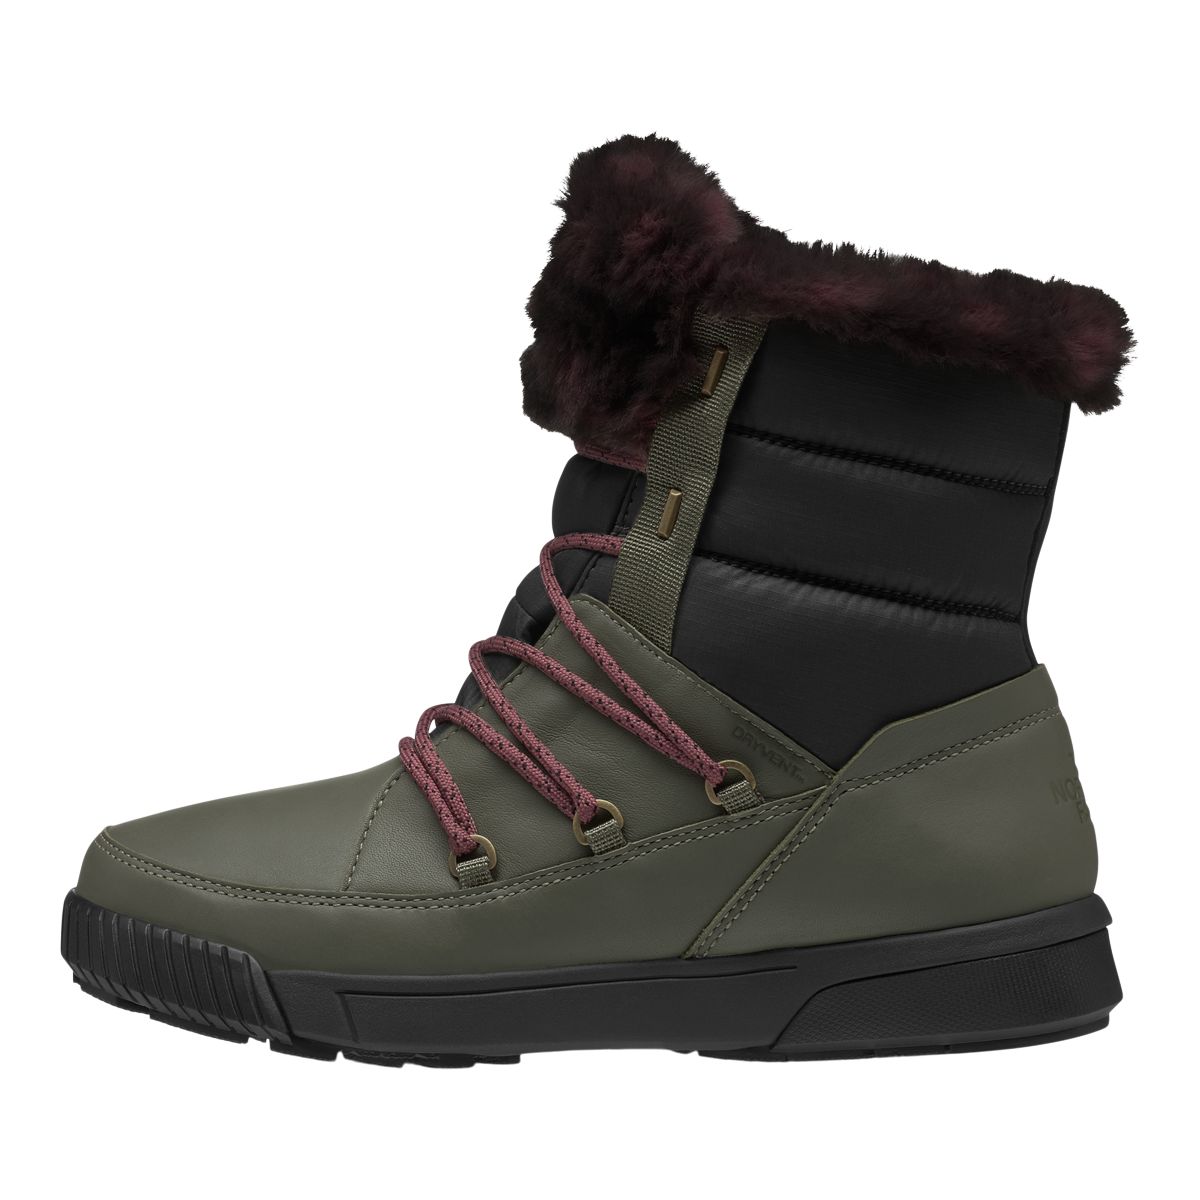 Image of The North Face Women's Storm Sierra Luxe Waterproof Insulated Lightweight Winter Boots